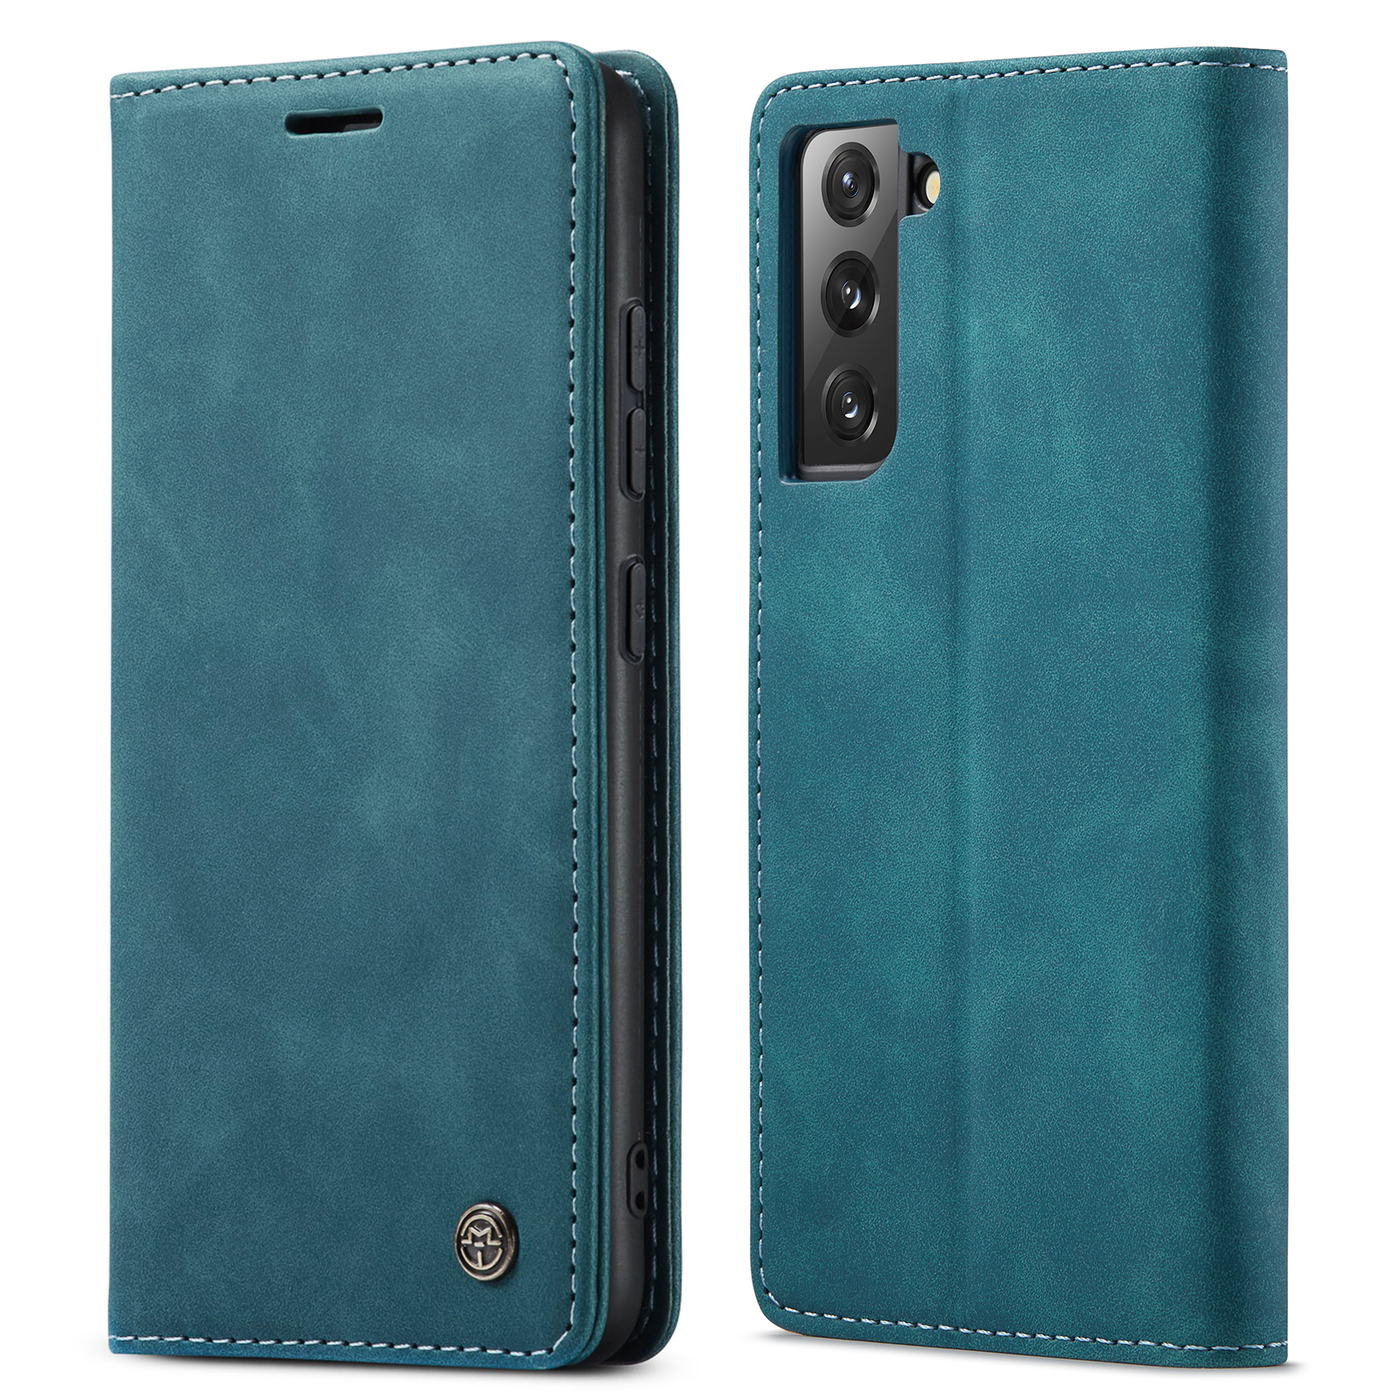 Samsung Galaxy S22 full body protection Leather Wallet flip case cover by Excelsior